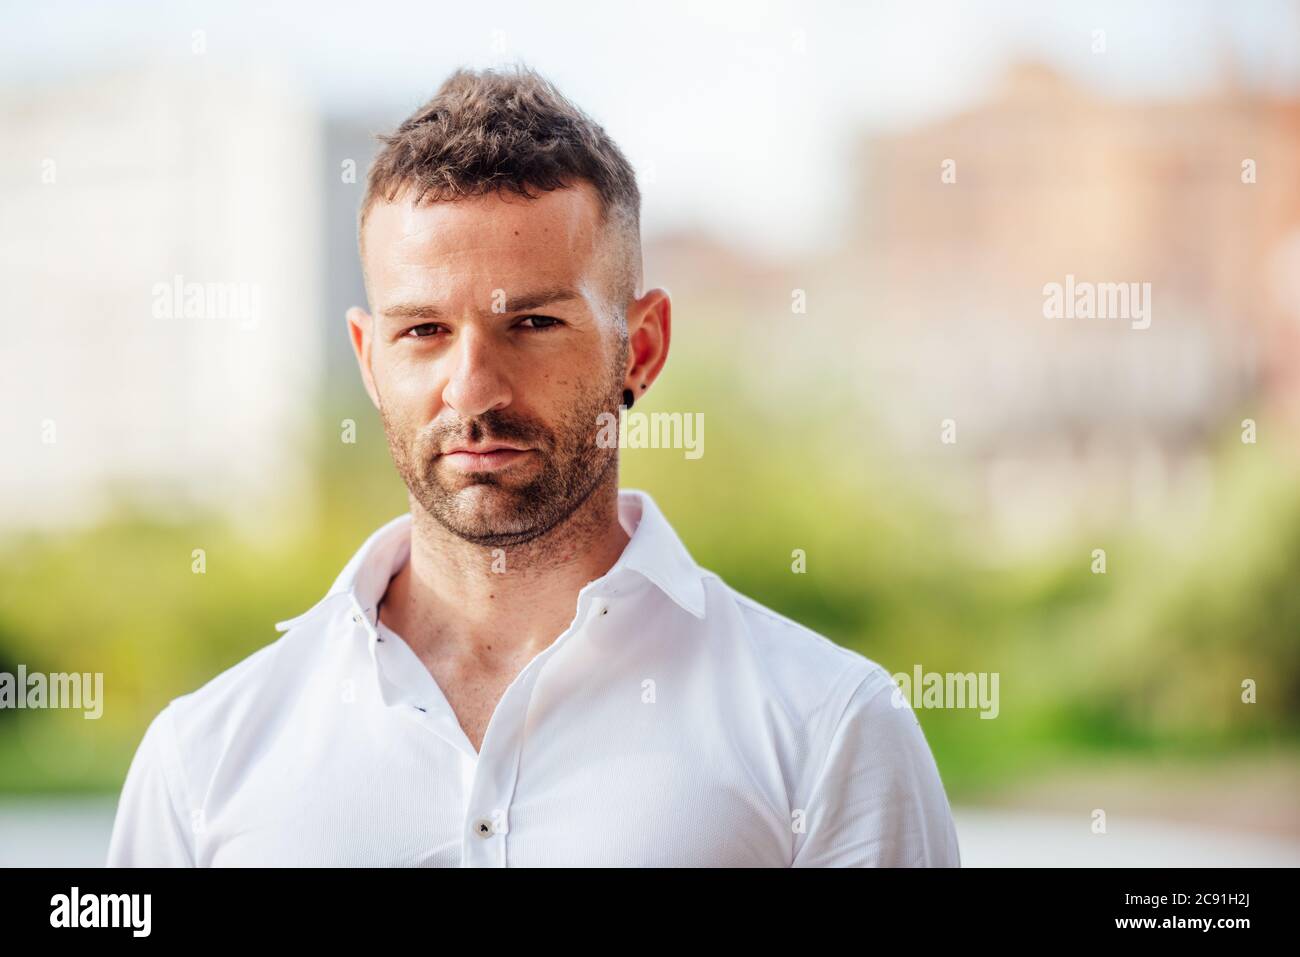 young man in white shirt looking at camera with short hair and short beard outdoors with plants and flowers background Stock Photo